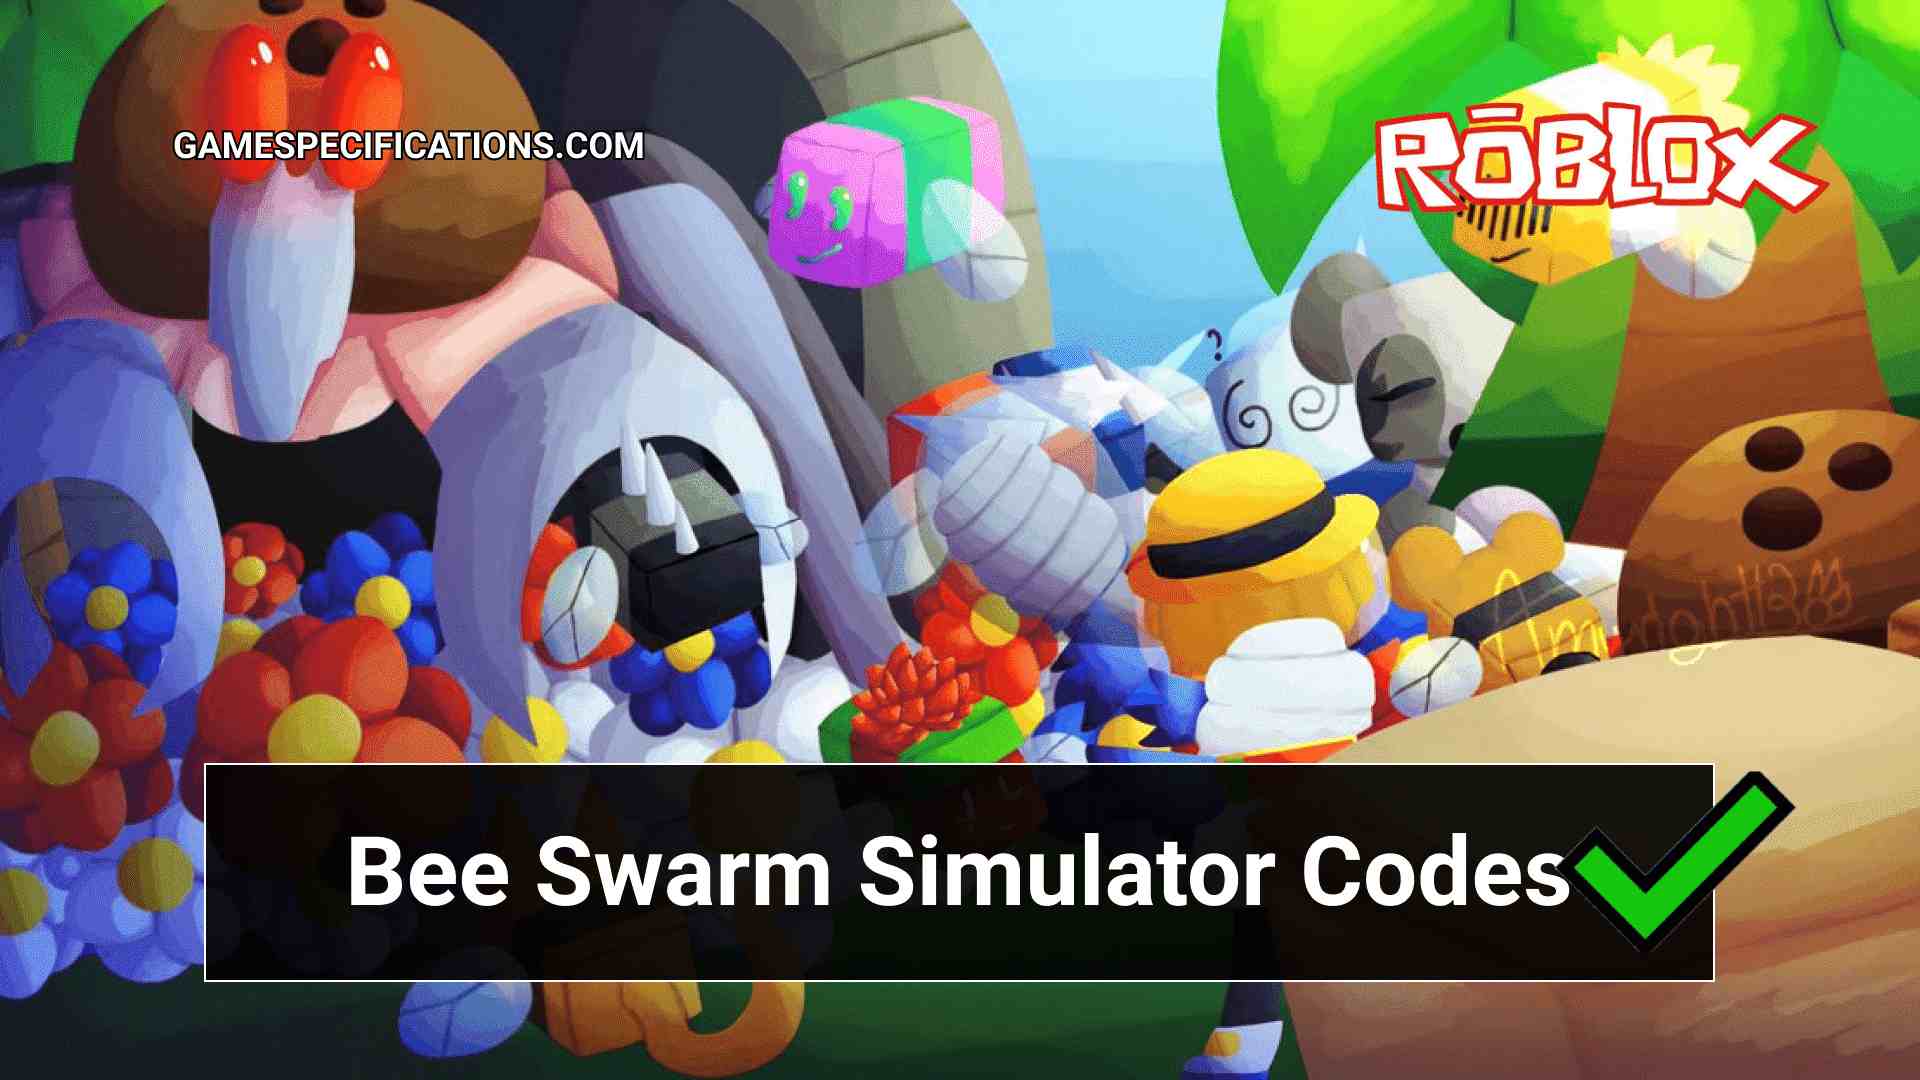 all-26-secret-mythic-cub-bee-codes-in-bee-swarm-simulator-super-op-roblox-360congnghe